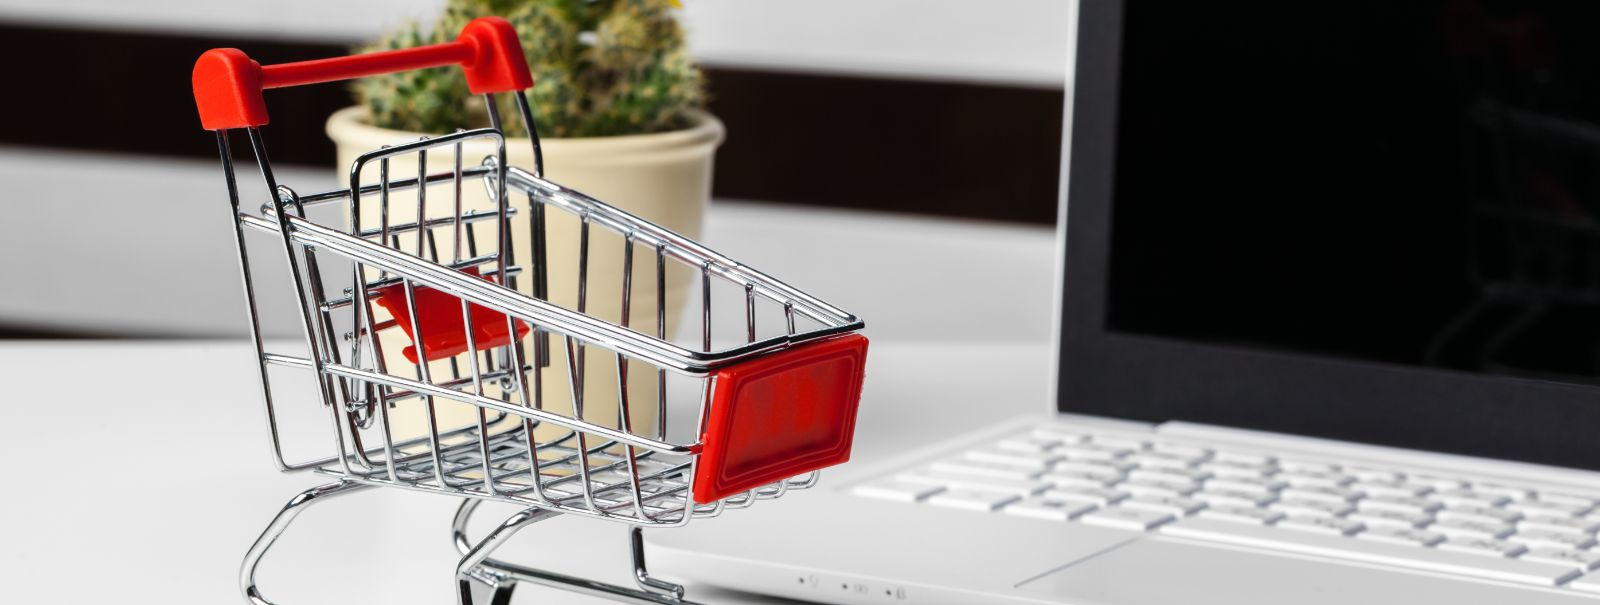 For businesses aiming to thrive in the digital marketplace, an online store is not just a necessity but a cornerstone of their sales strategy. However, creating